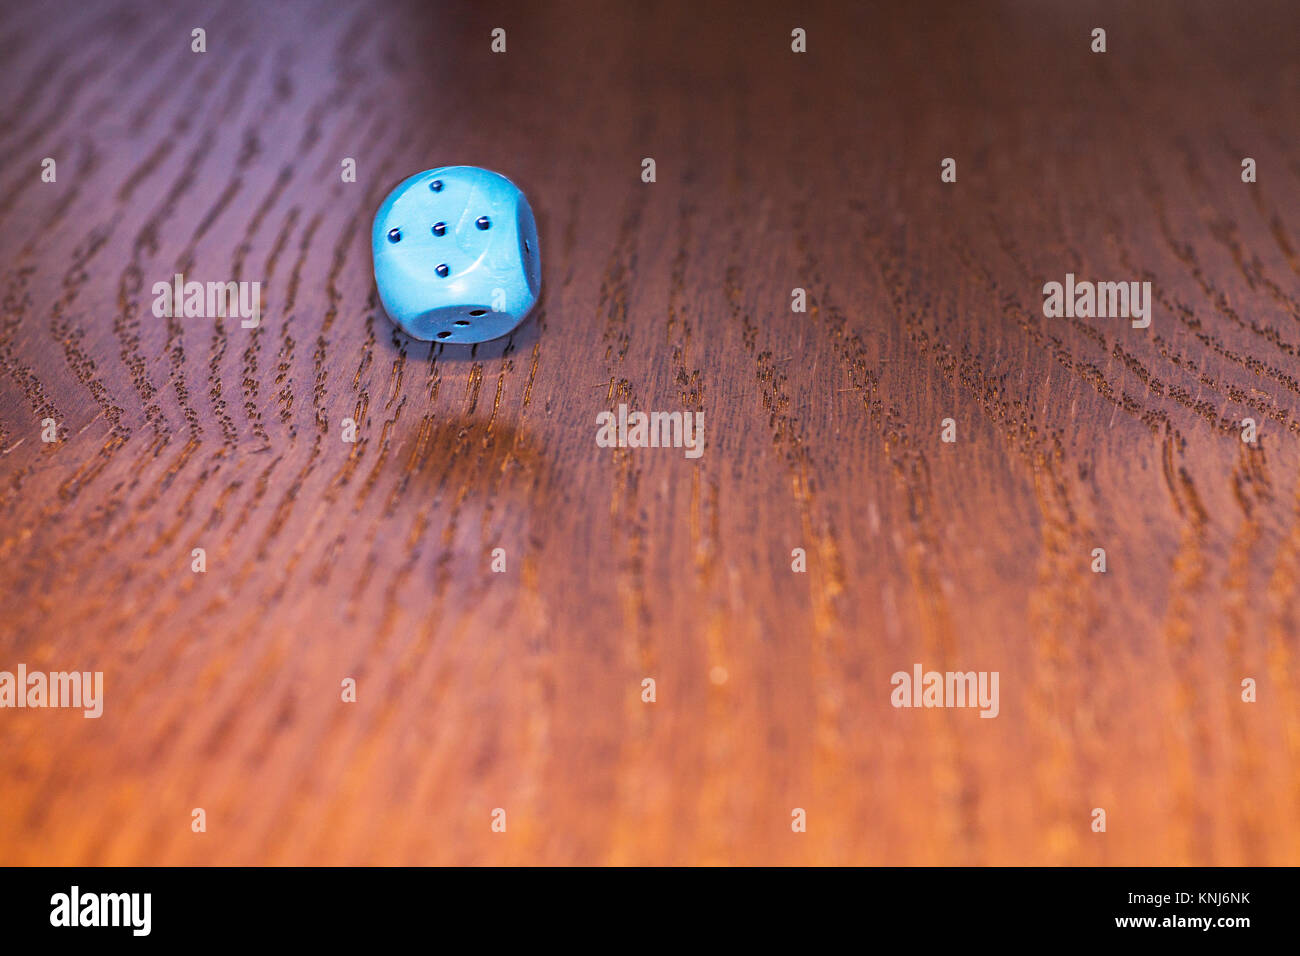 The dice roll on the wooden table. Role-playing game Dungeons and Dragons. Gambling in the casino. Stock Photo